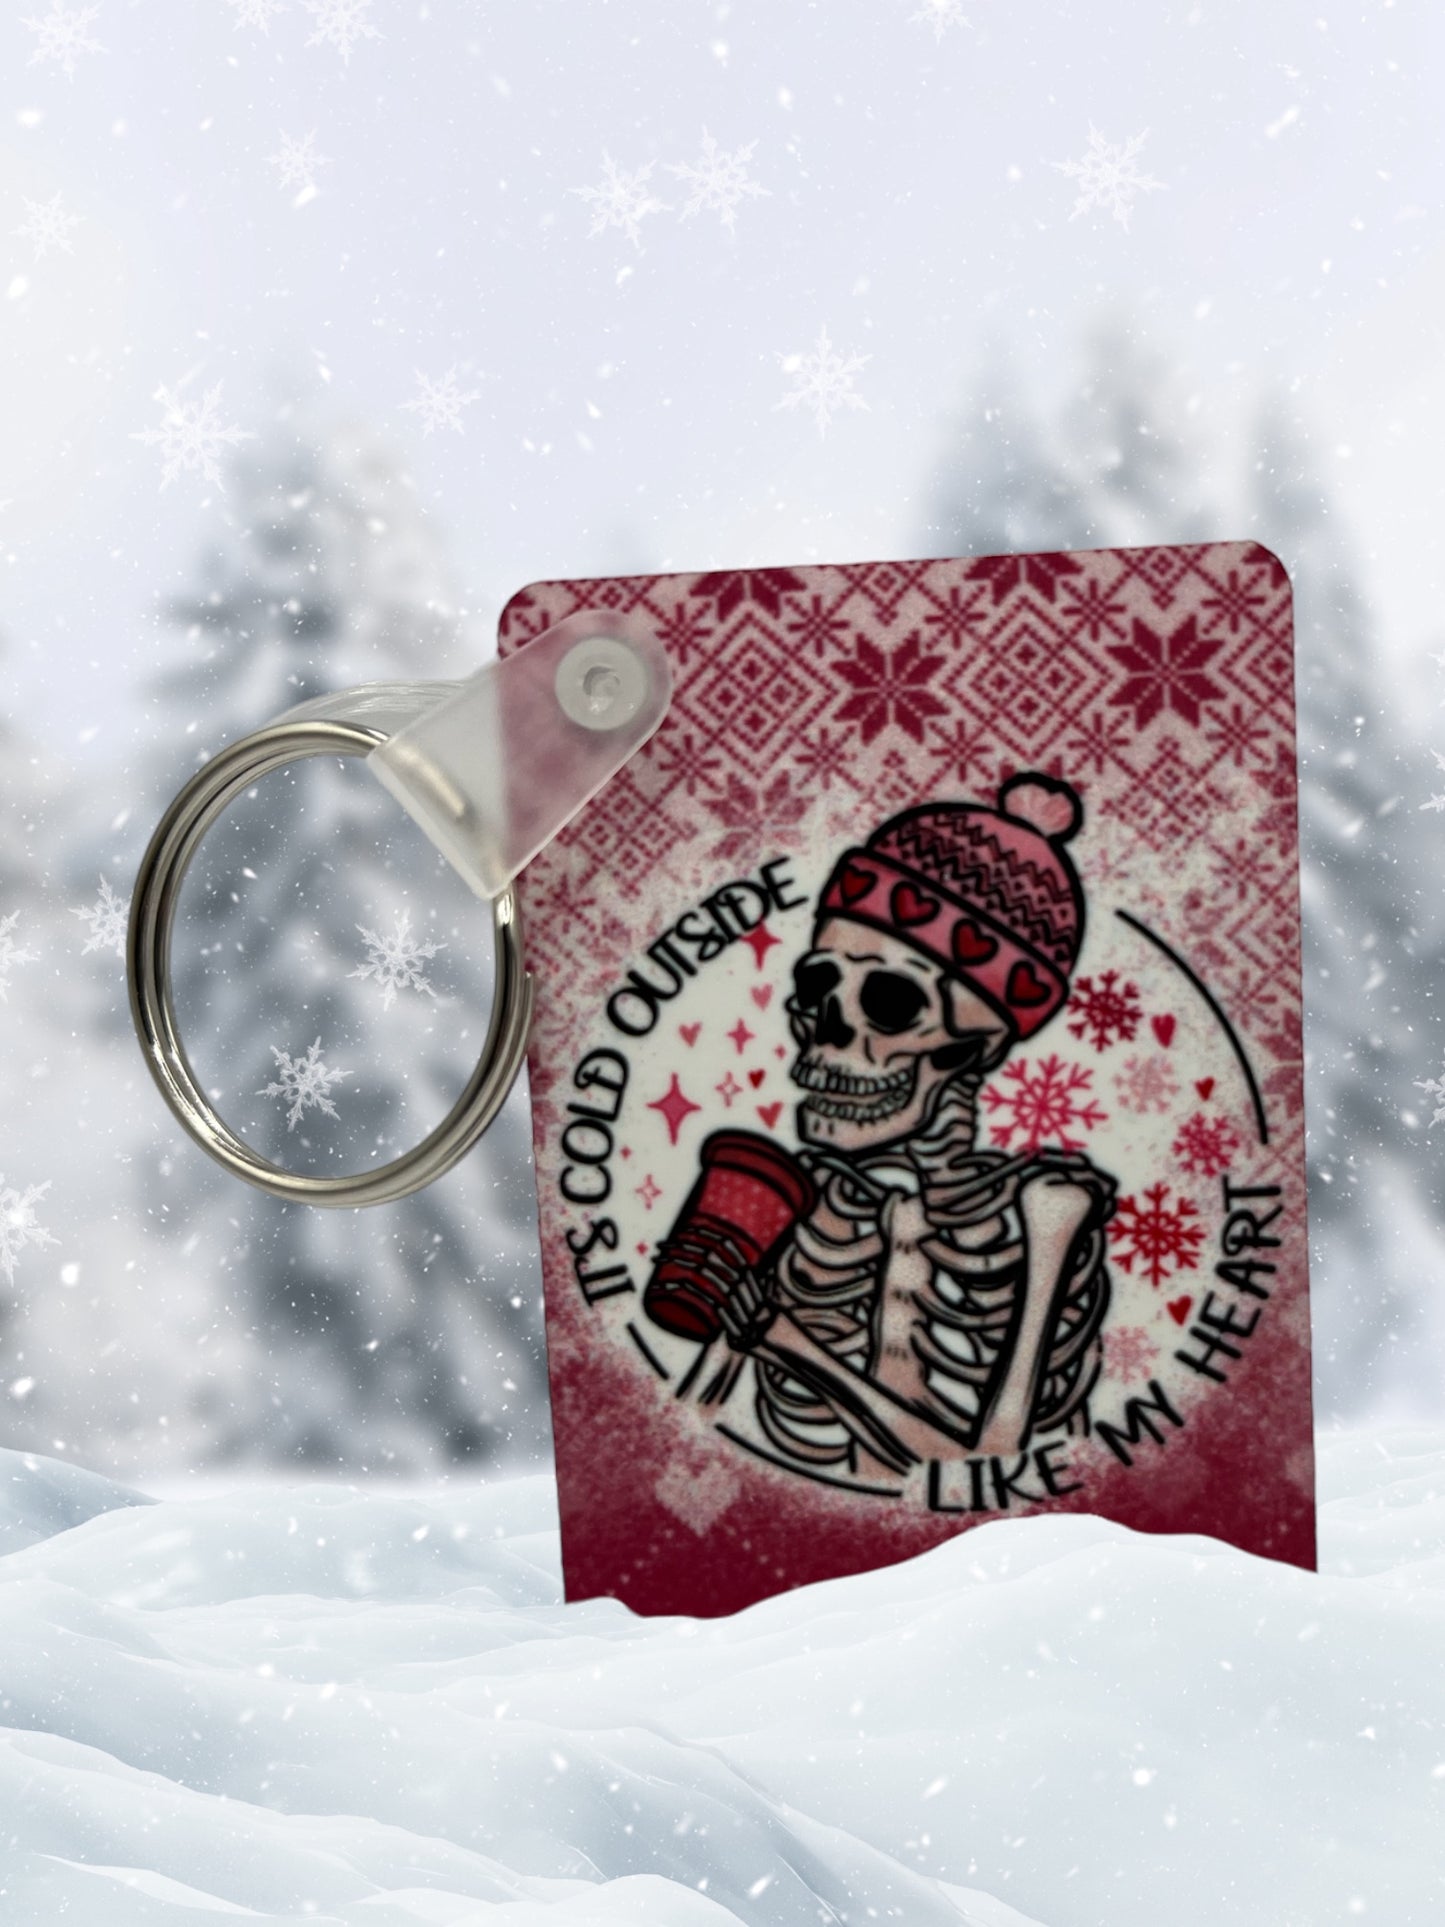 “It’s Cold Outside… Like My Heart” Keychain